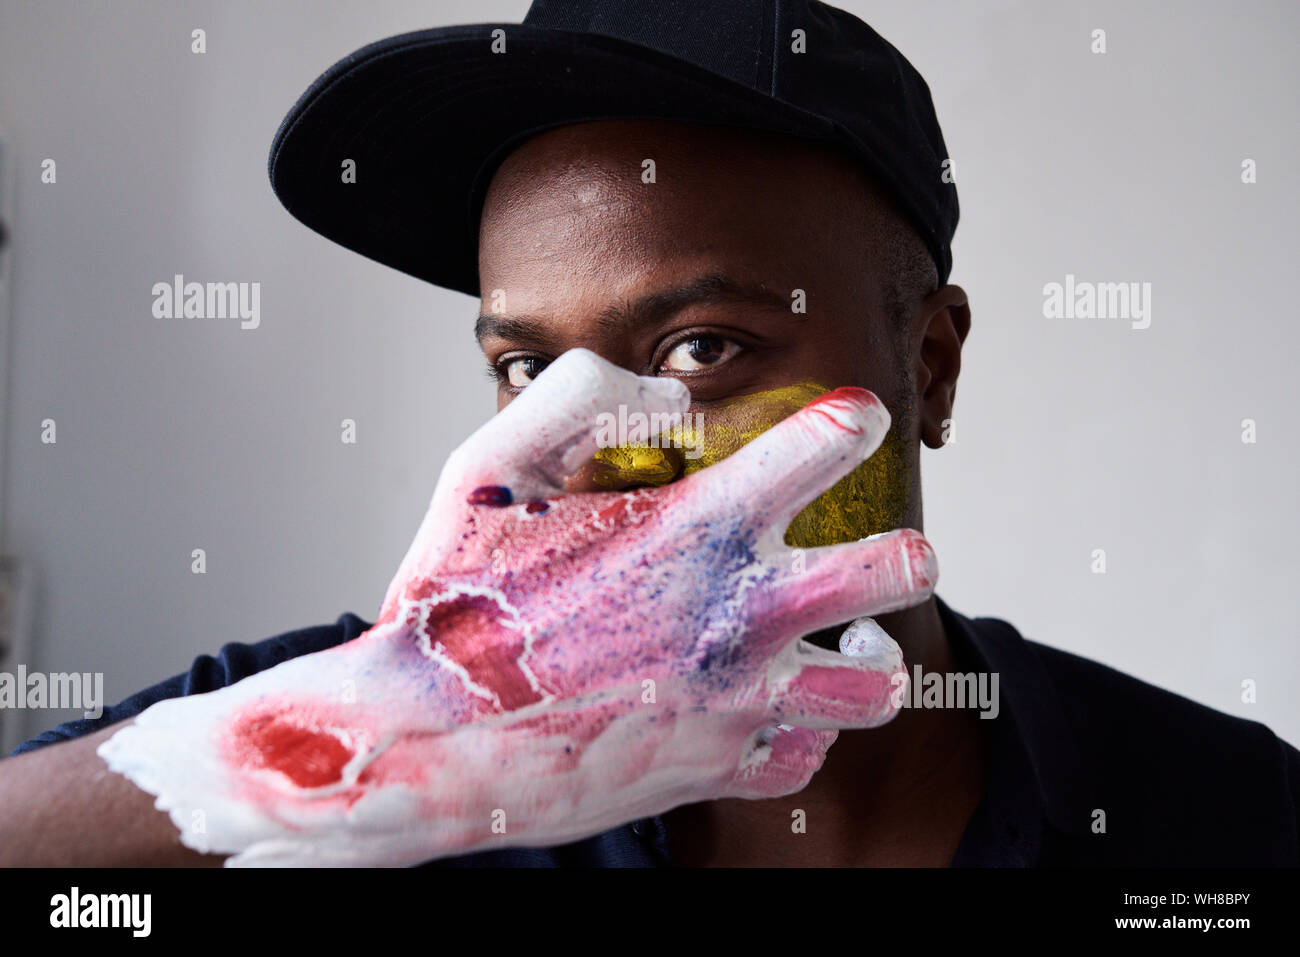 Angry artist with hand covered in paint looking at camera Stock Photo